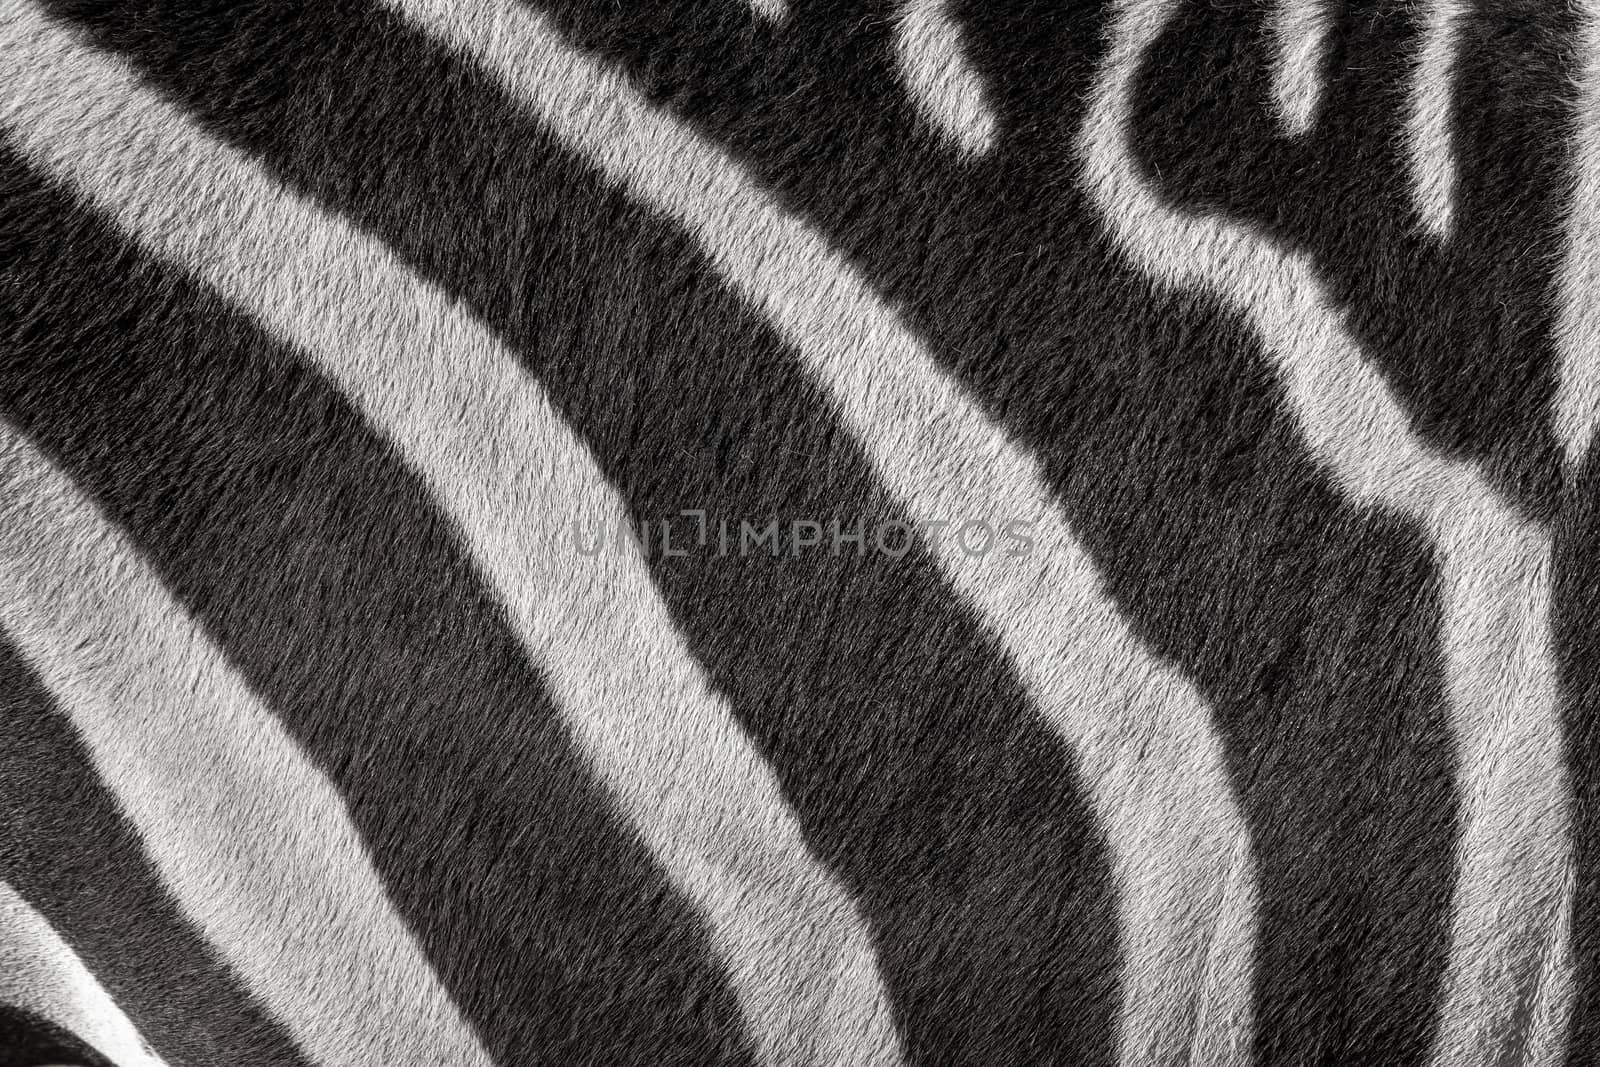 Zebra pattern with black and white by liewluck